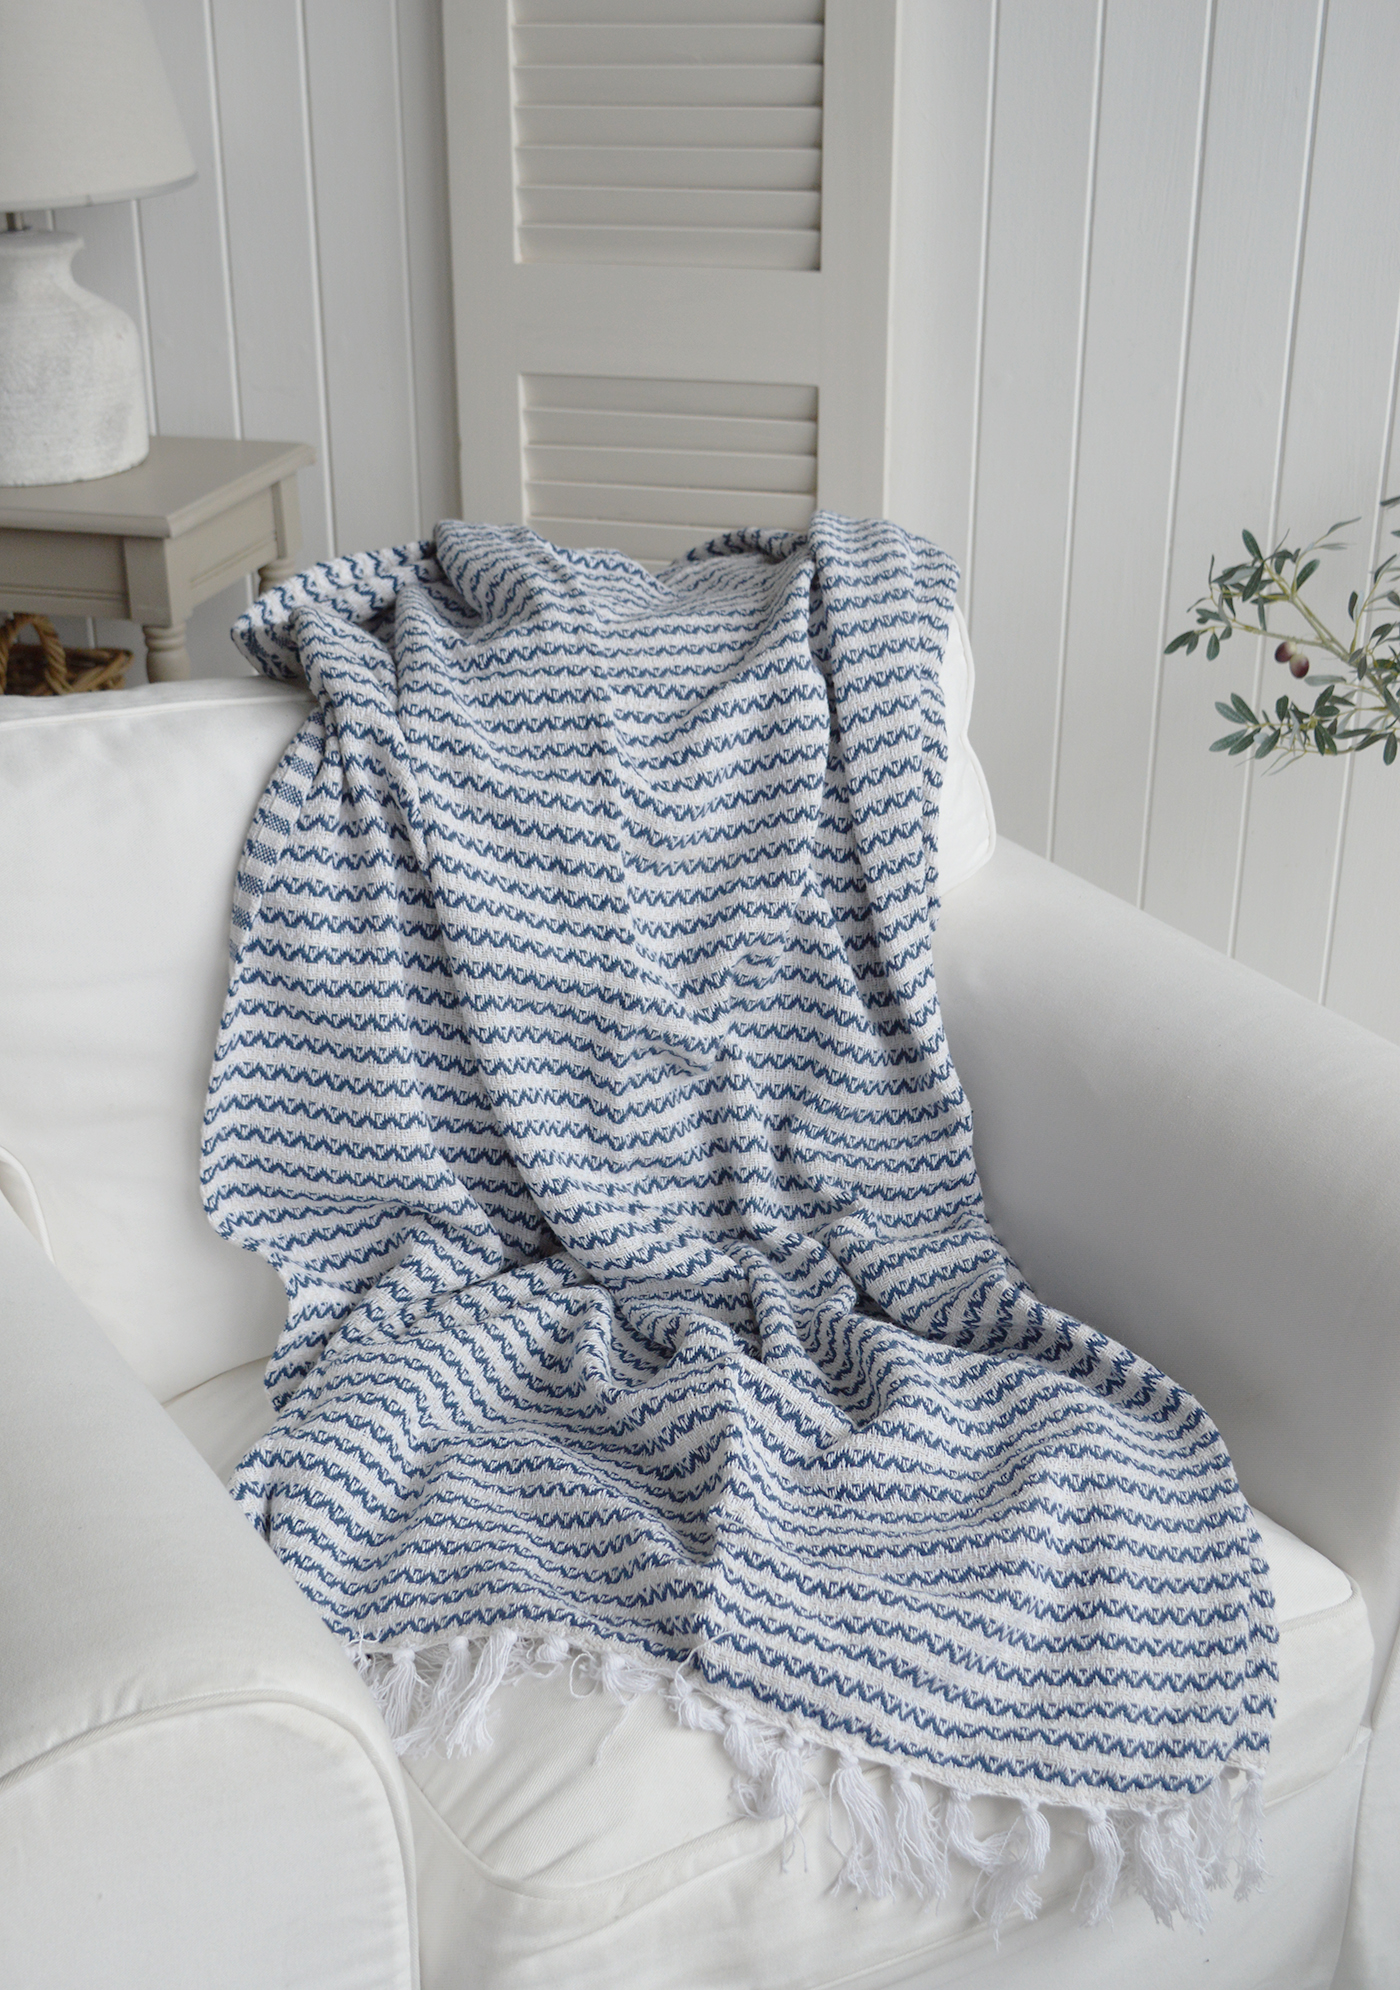 Hadley Throw Blanket in linen, blue and white - New England, coastal and farmhouse style furniture and interiors